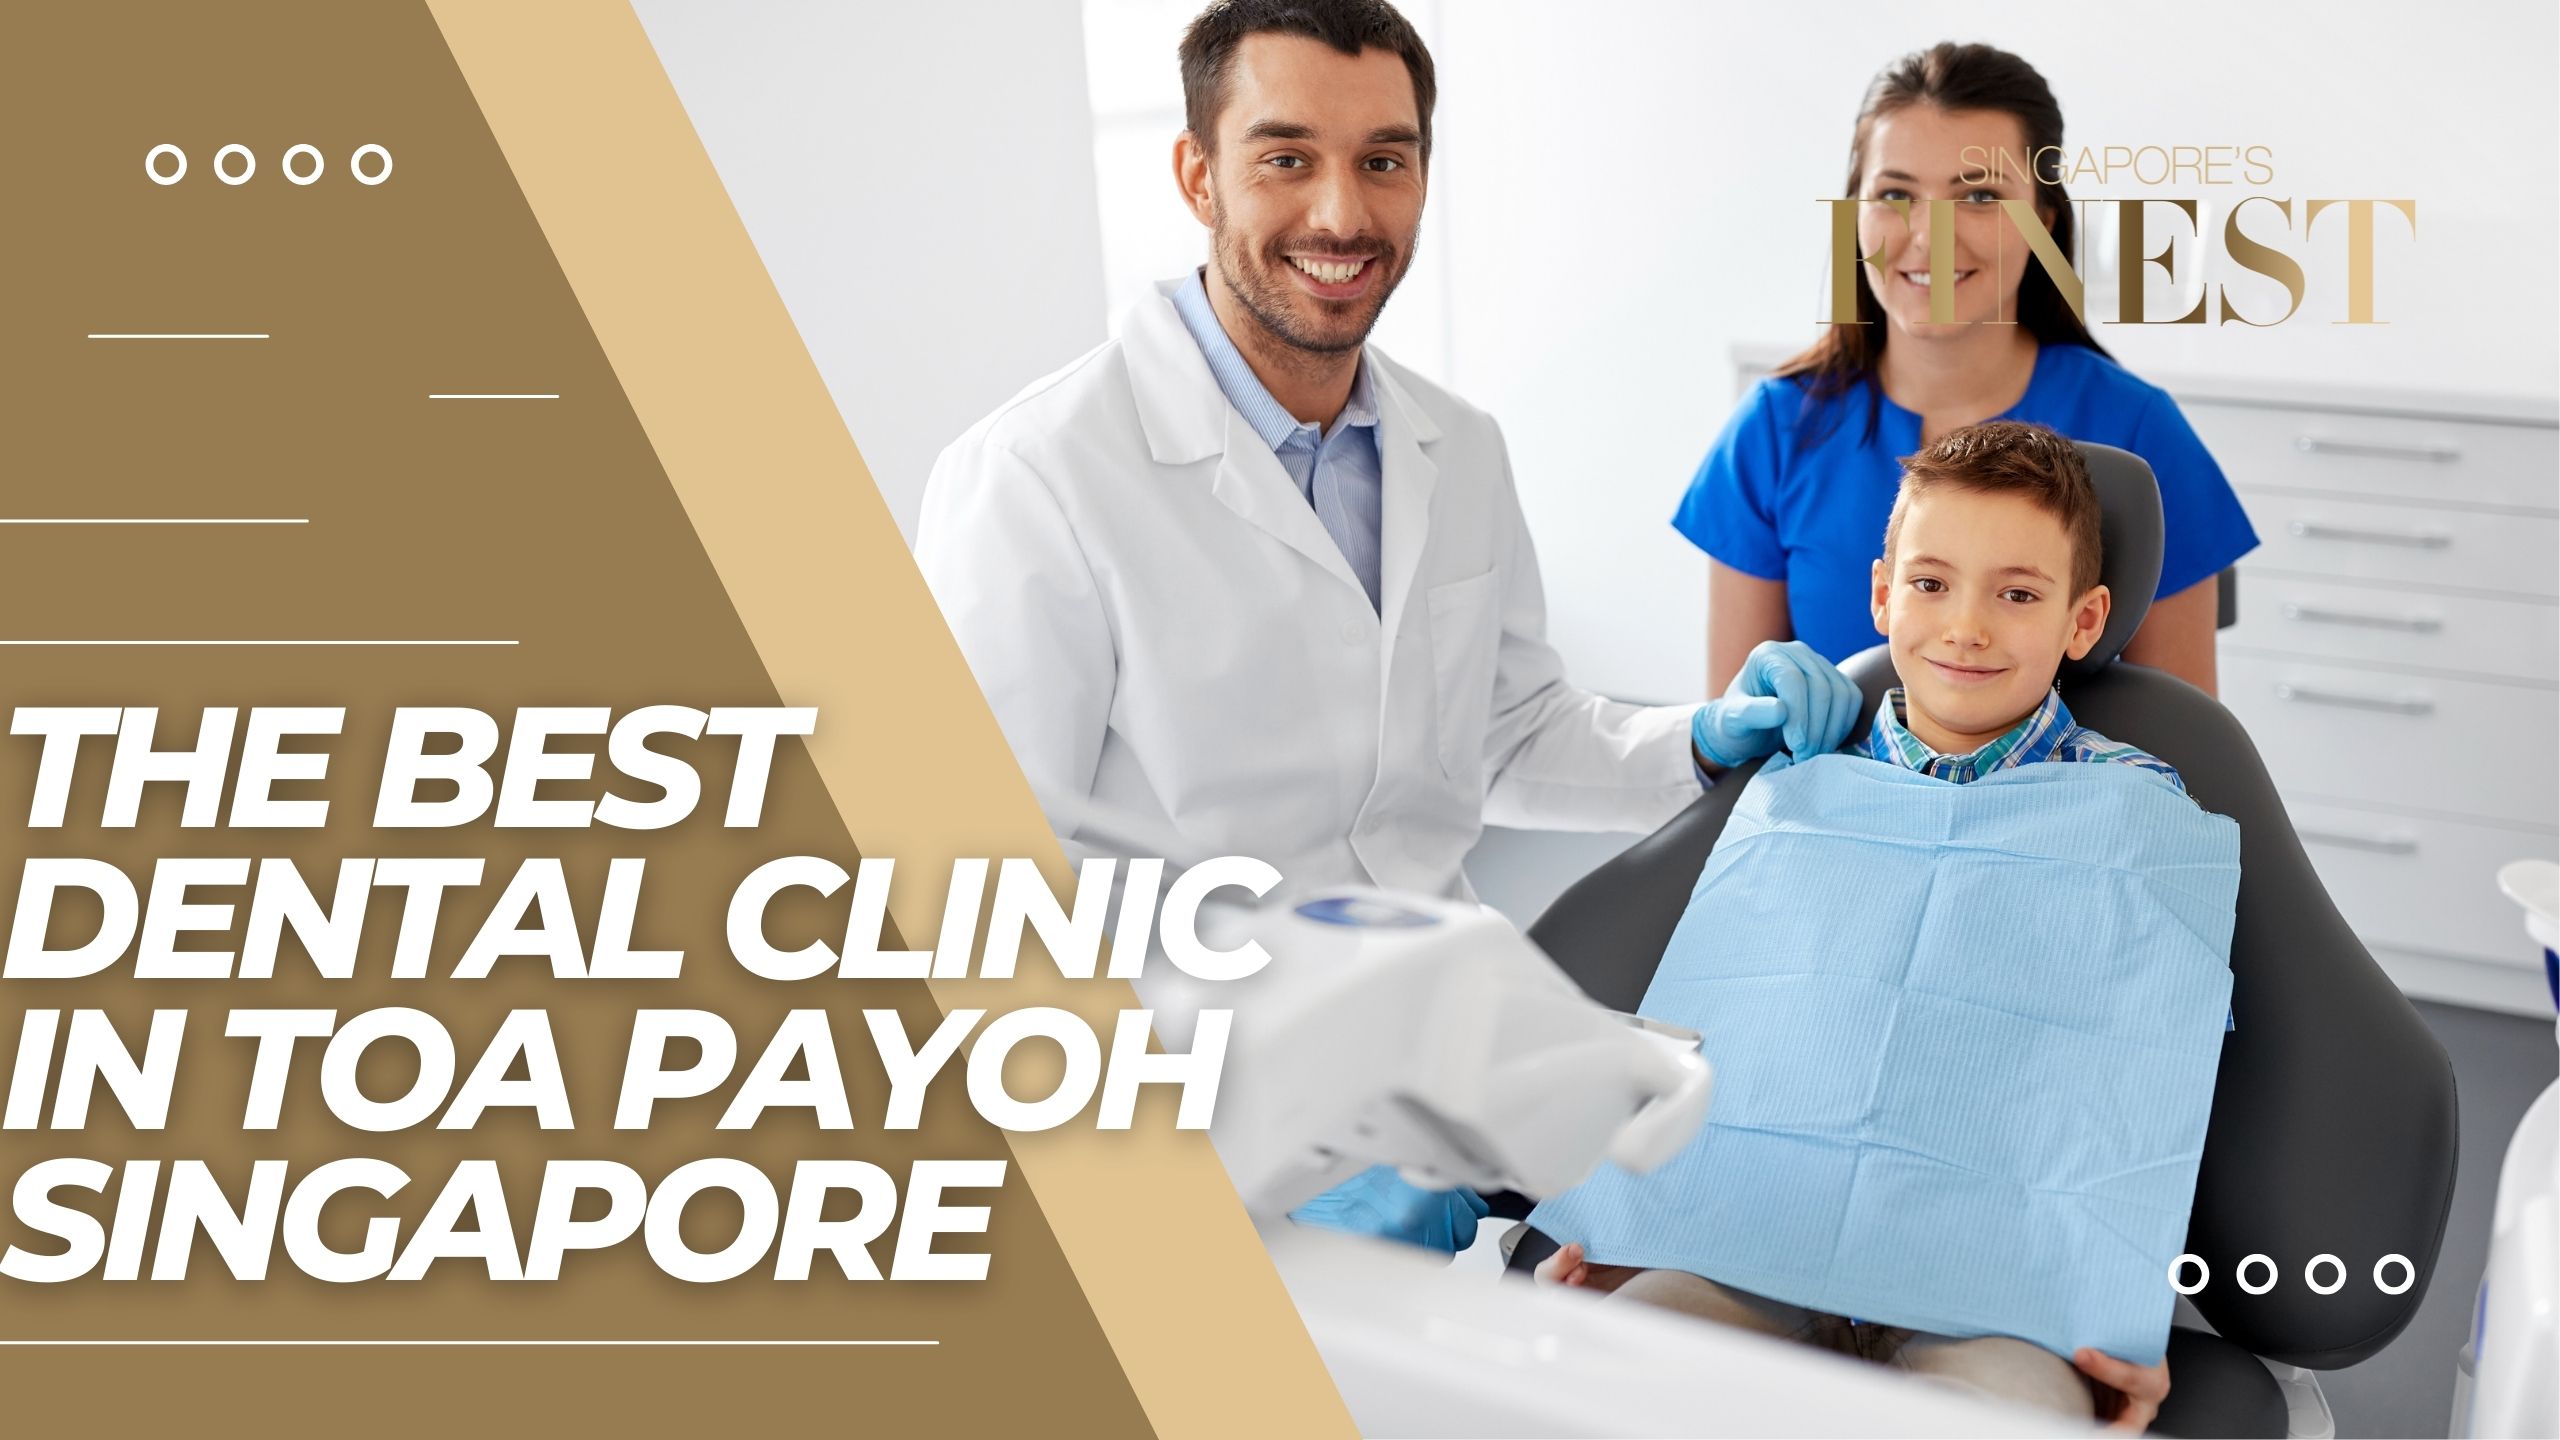 The Finest Dental Clinic in Toa Payoh Singapore